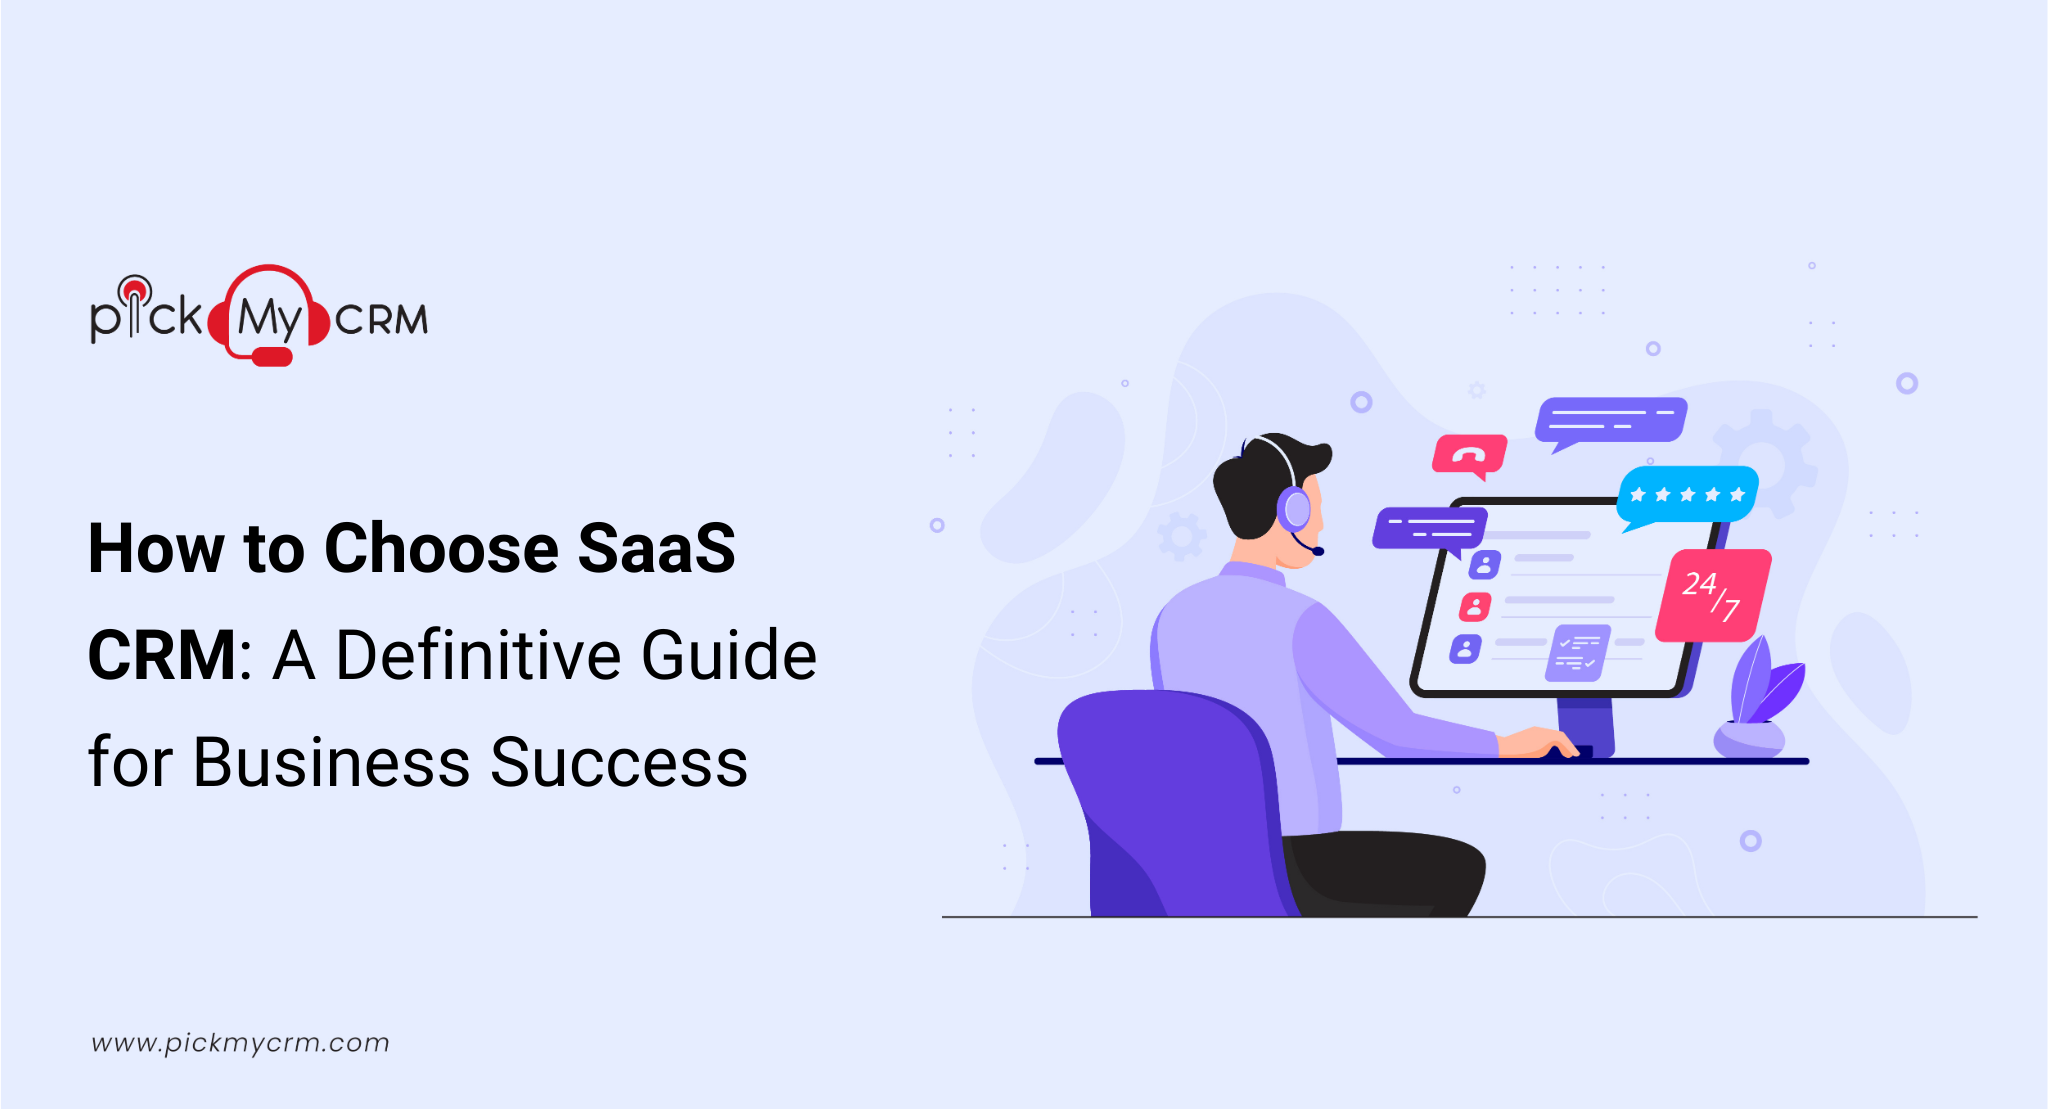 How to Choose SaaS CRM: A Definitive Guide for Business Success